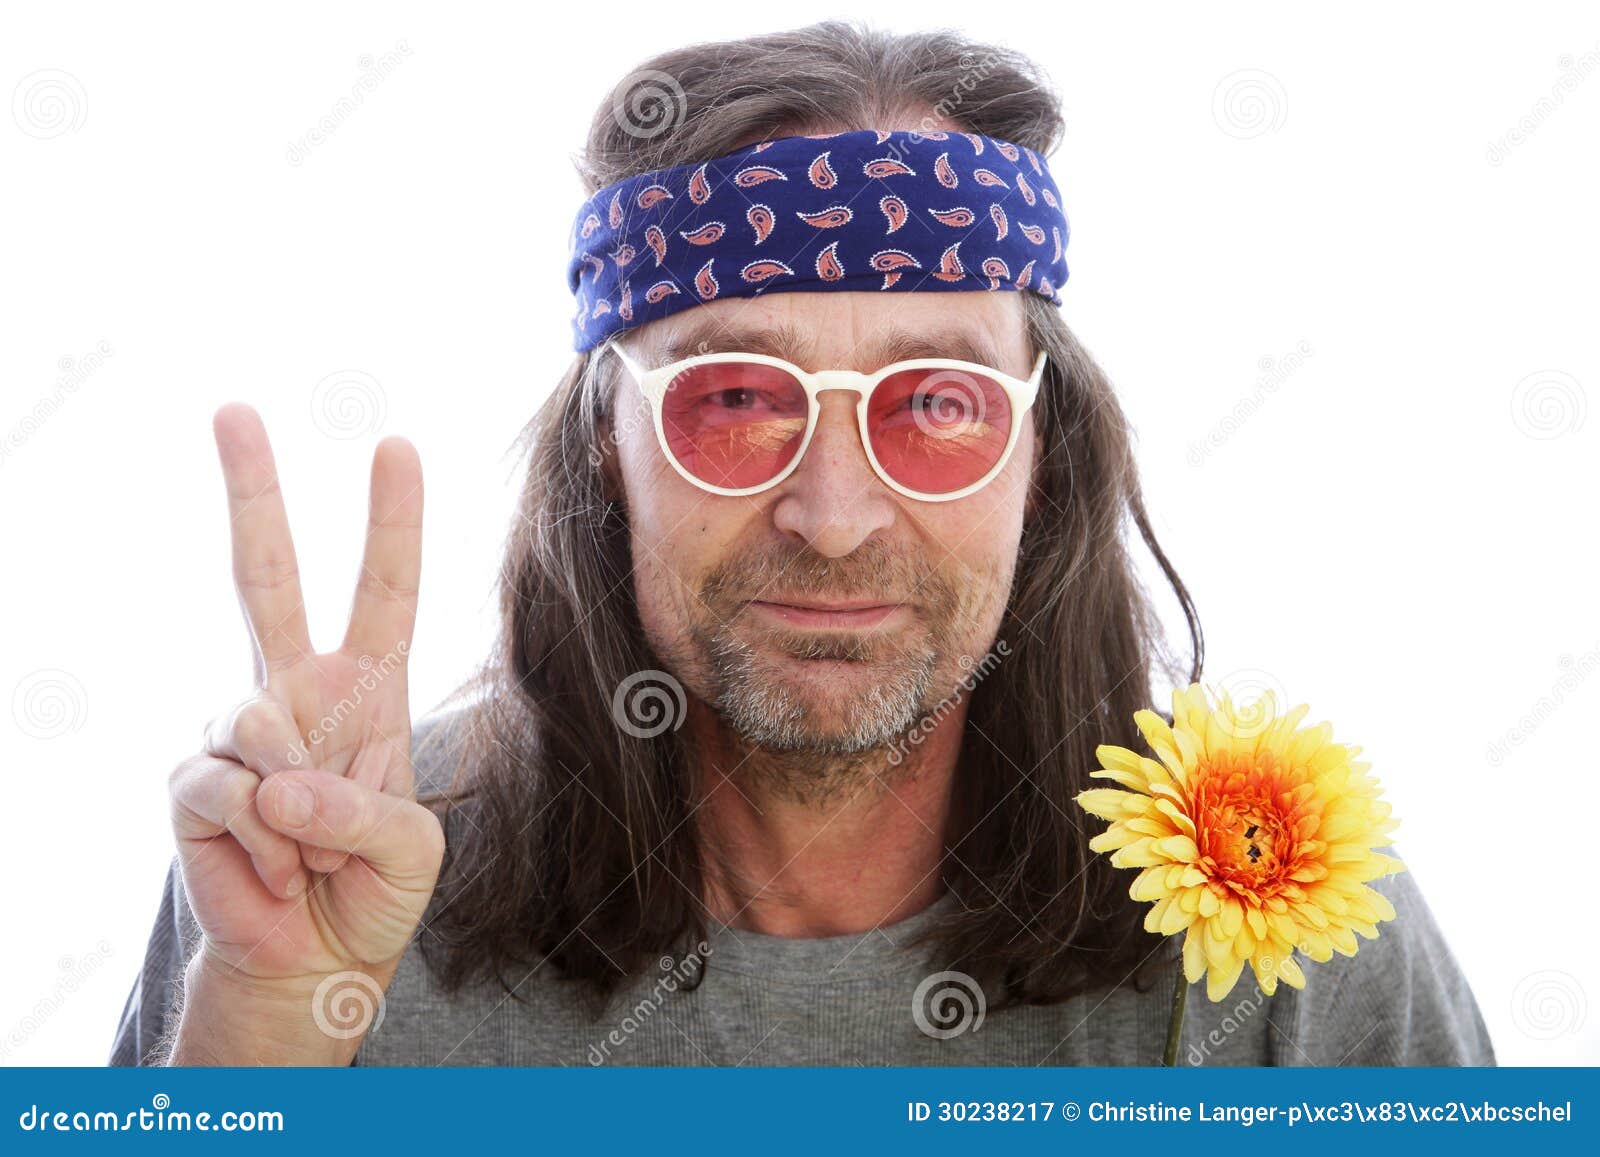 unshaven-male-hippie-long-shoulder-length-hair-wearing-headband-yellow-flower-rose-coloured-glasses-making-peace-sign-30238217.jpg